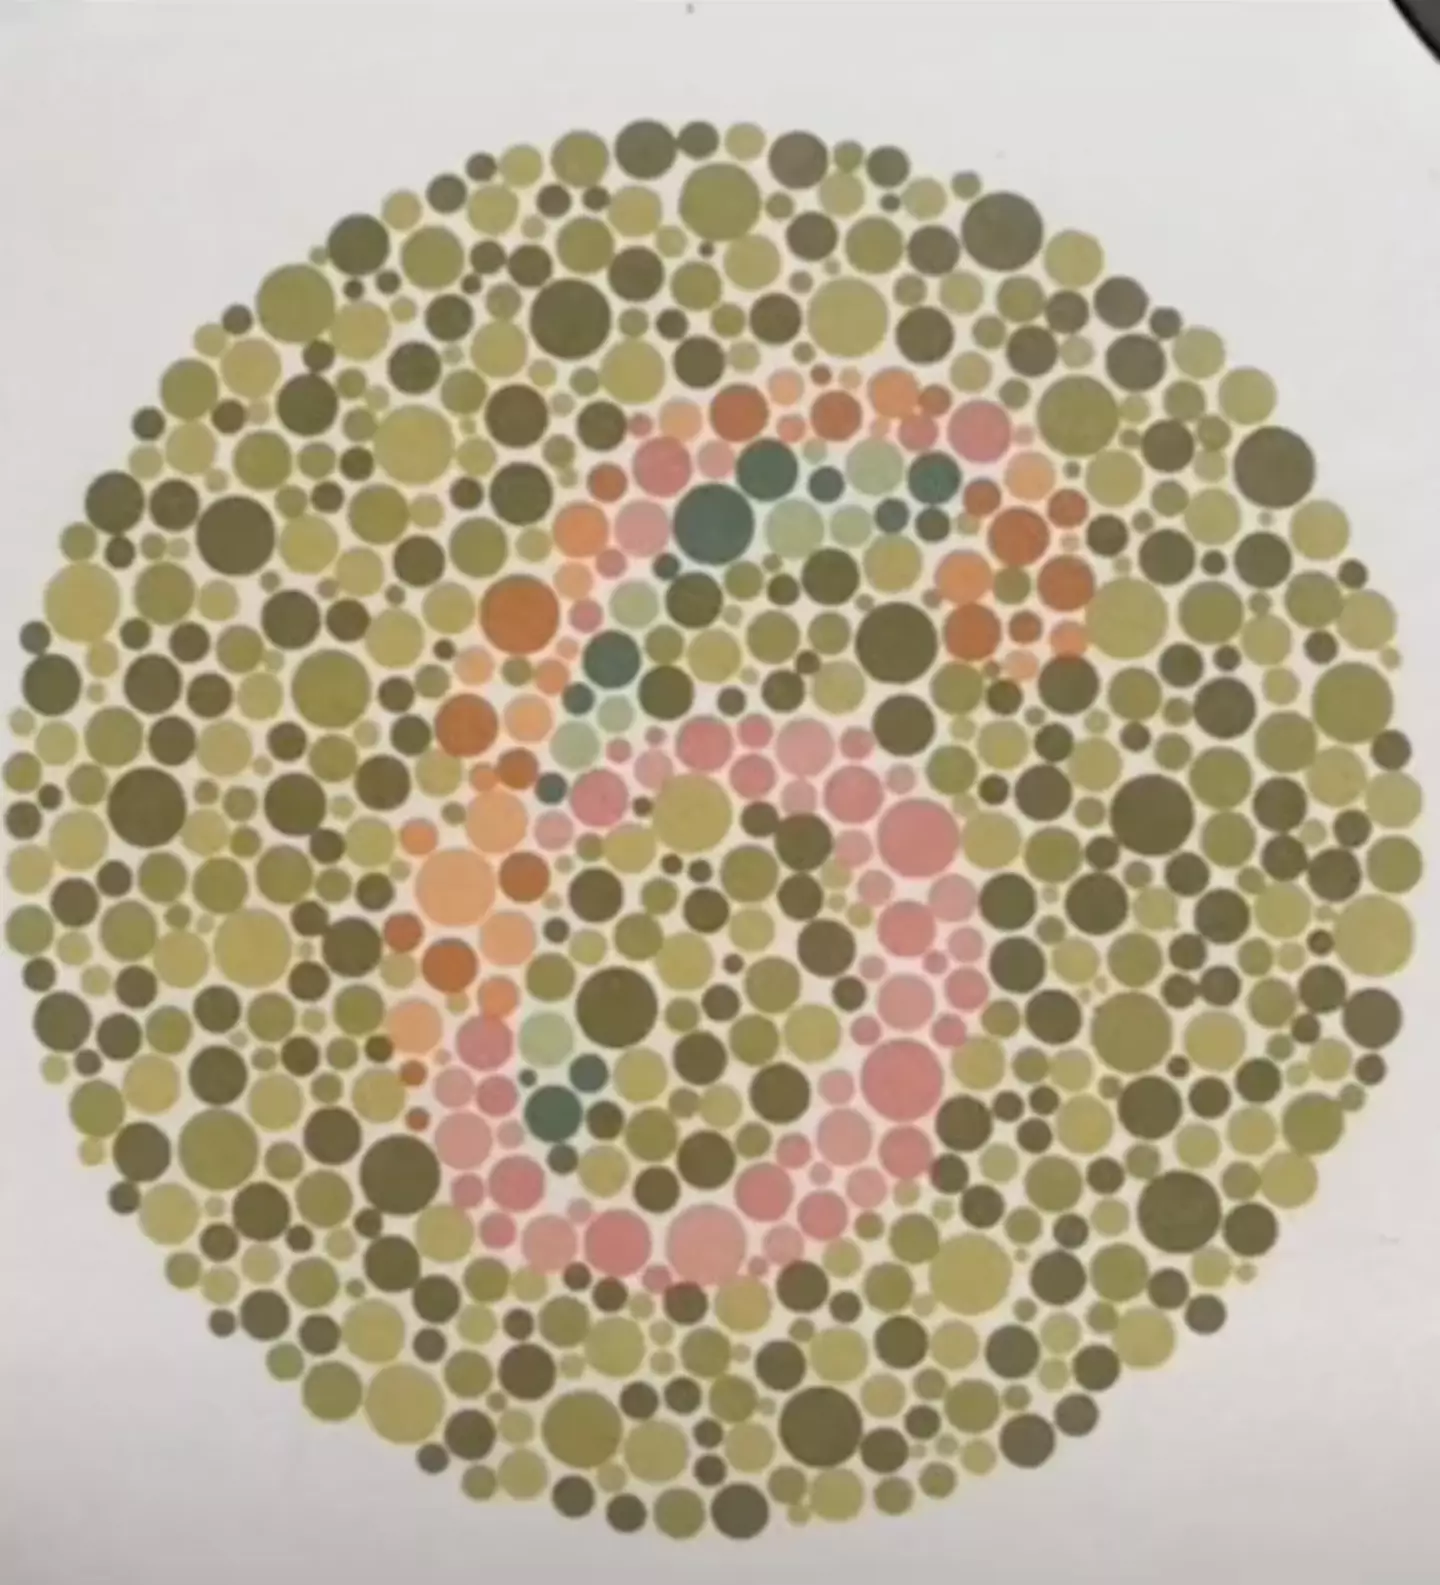 This is an Ishihara chart.